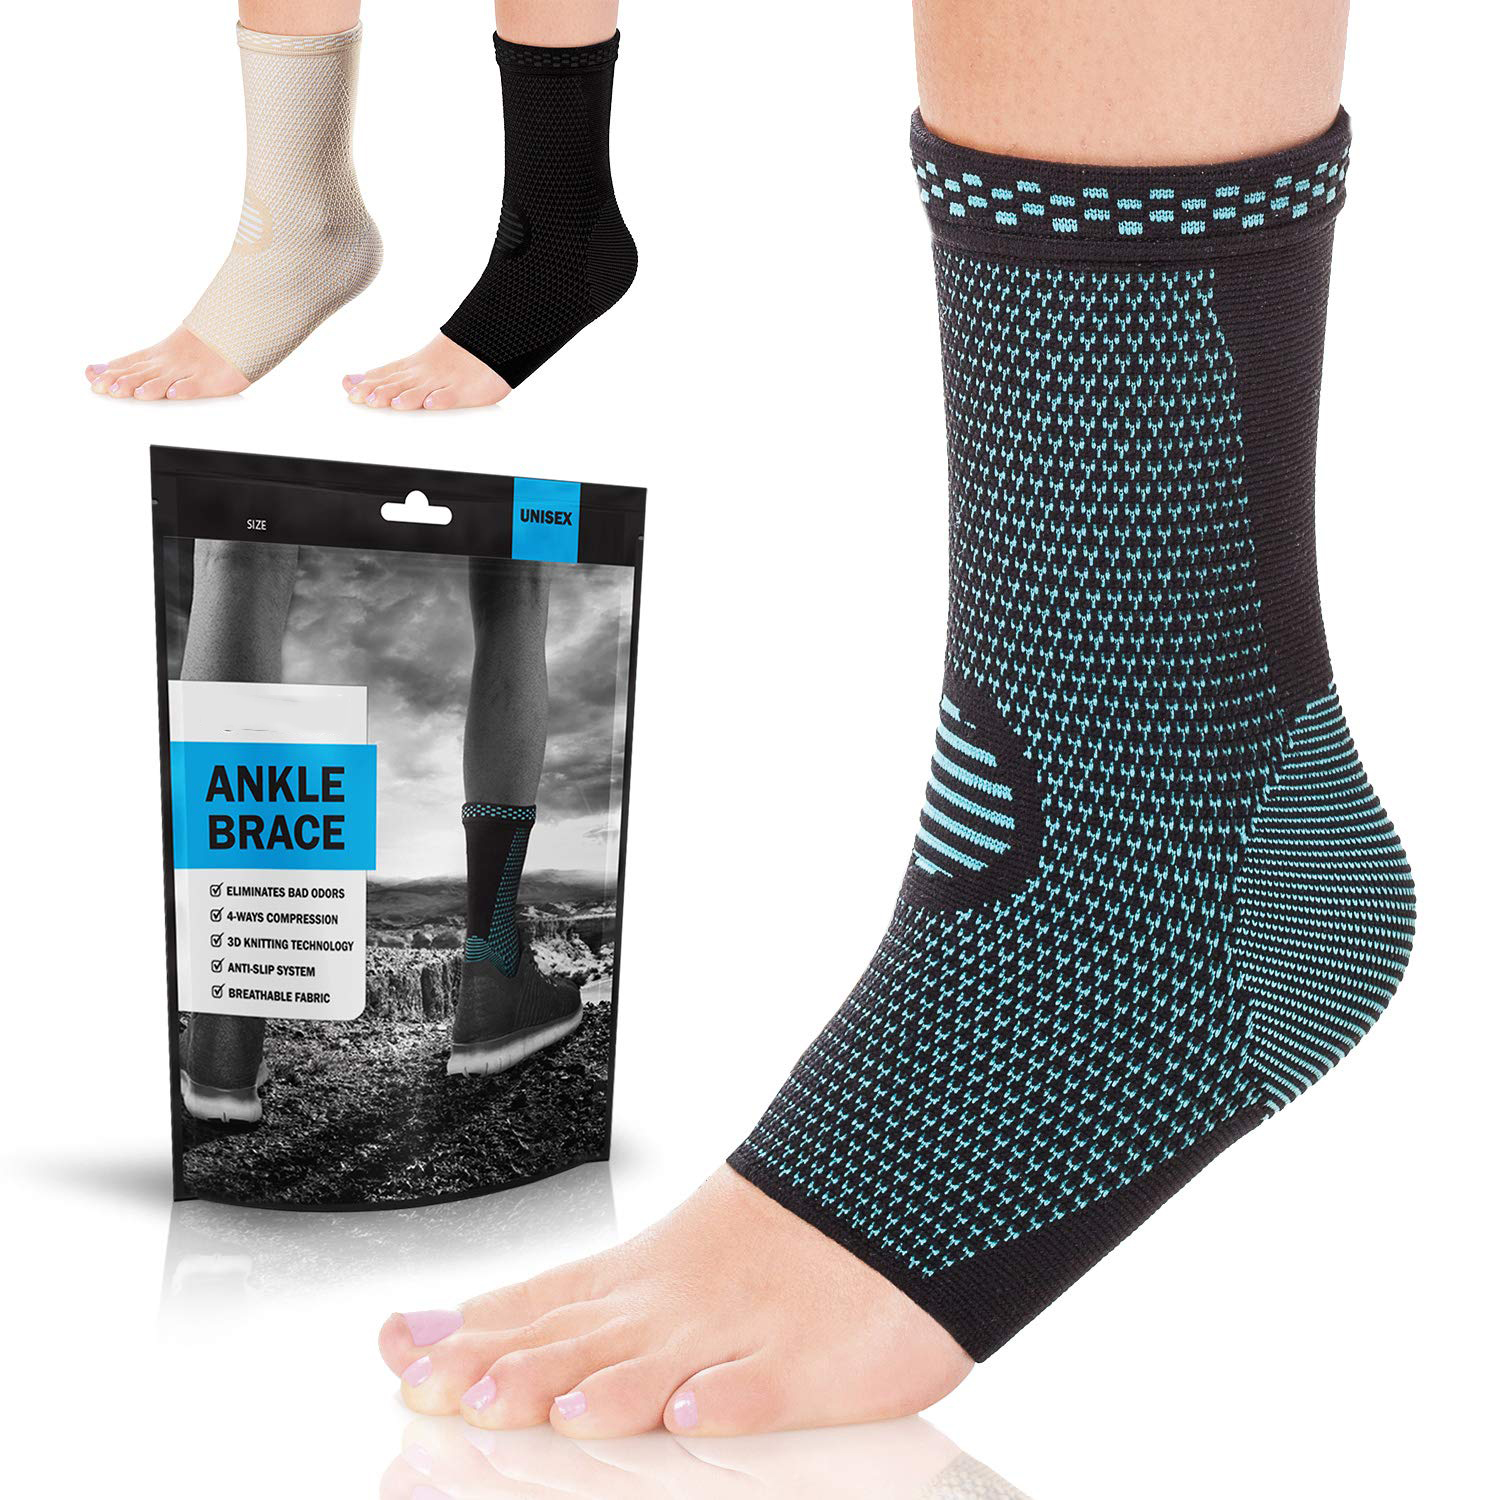 Wholesale Discount Nylon Shoulder Sleeve - Ankle Brace Compression Support Sleeve (Pair) for Injury Recovery, Joint Pain and More. Achilles Tendon Support, Plantar Fasciitis Foot Socks with Arch S...